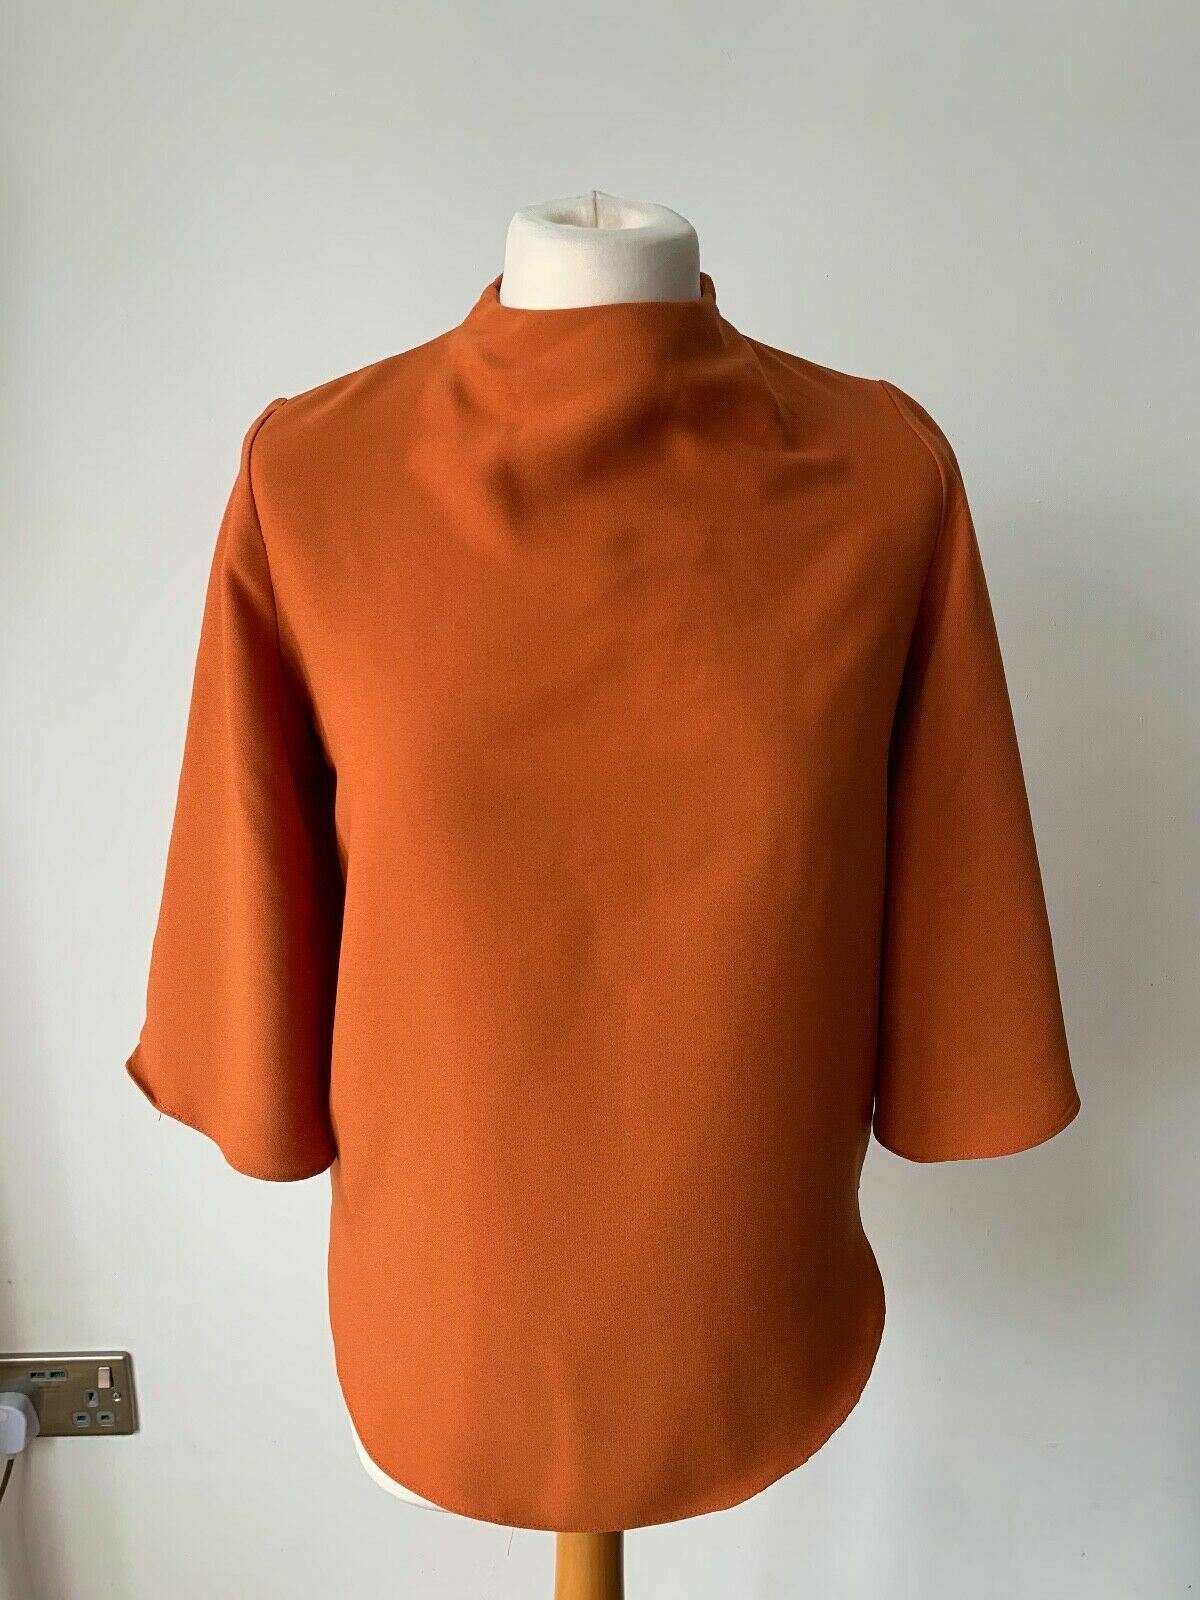 River Island Rusty Orange Blouse High Neck Size 8  Bell Sleeves